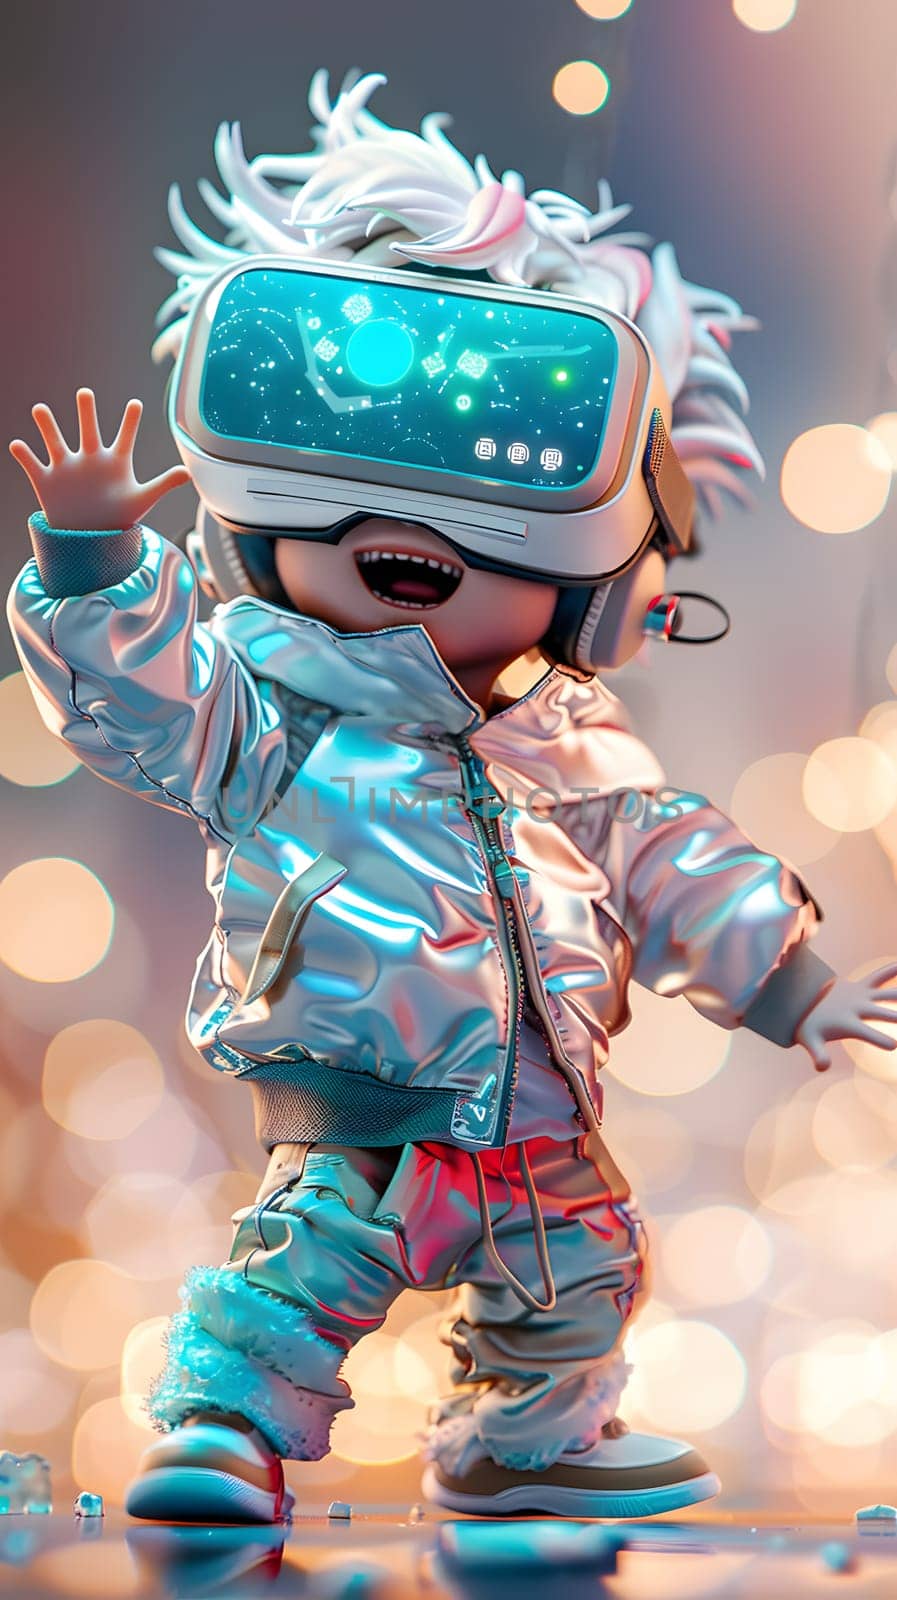 Toddler in pink sleeve waving happily in virtual reality headset by Nadtochiy